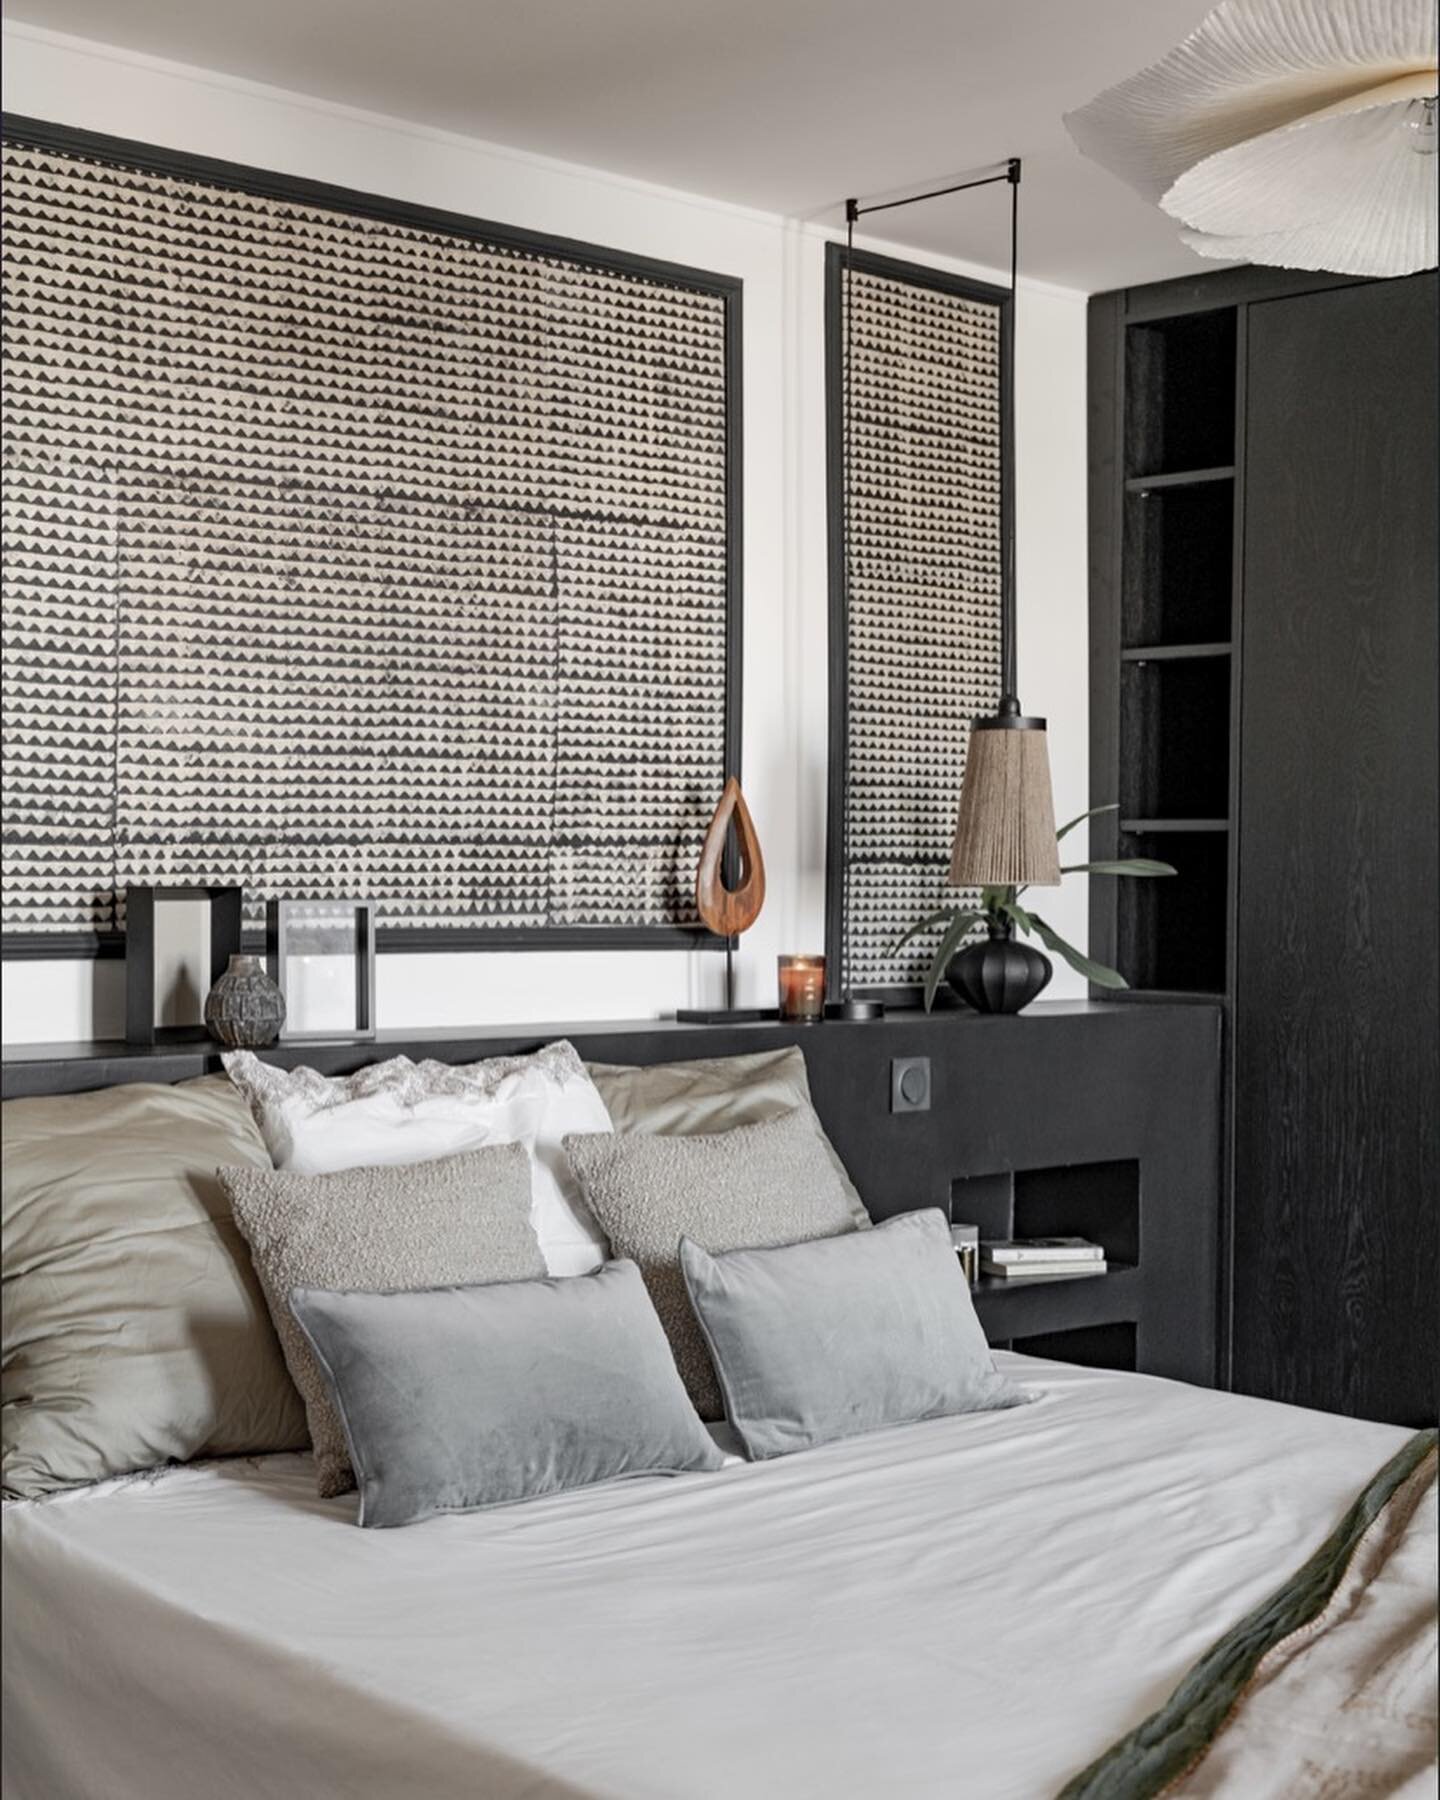 Project Bois - Voyage exotique 

Beautiful bedroom inspired by african textiles and design, this stunning bedroom features a bold black headwall, accentuated molding, and wardrobe, perfectly contrasted with crisp white. Infusing depth with rattan ele